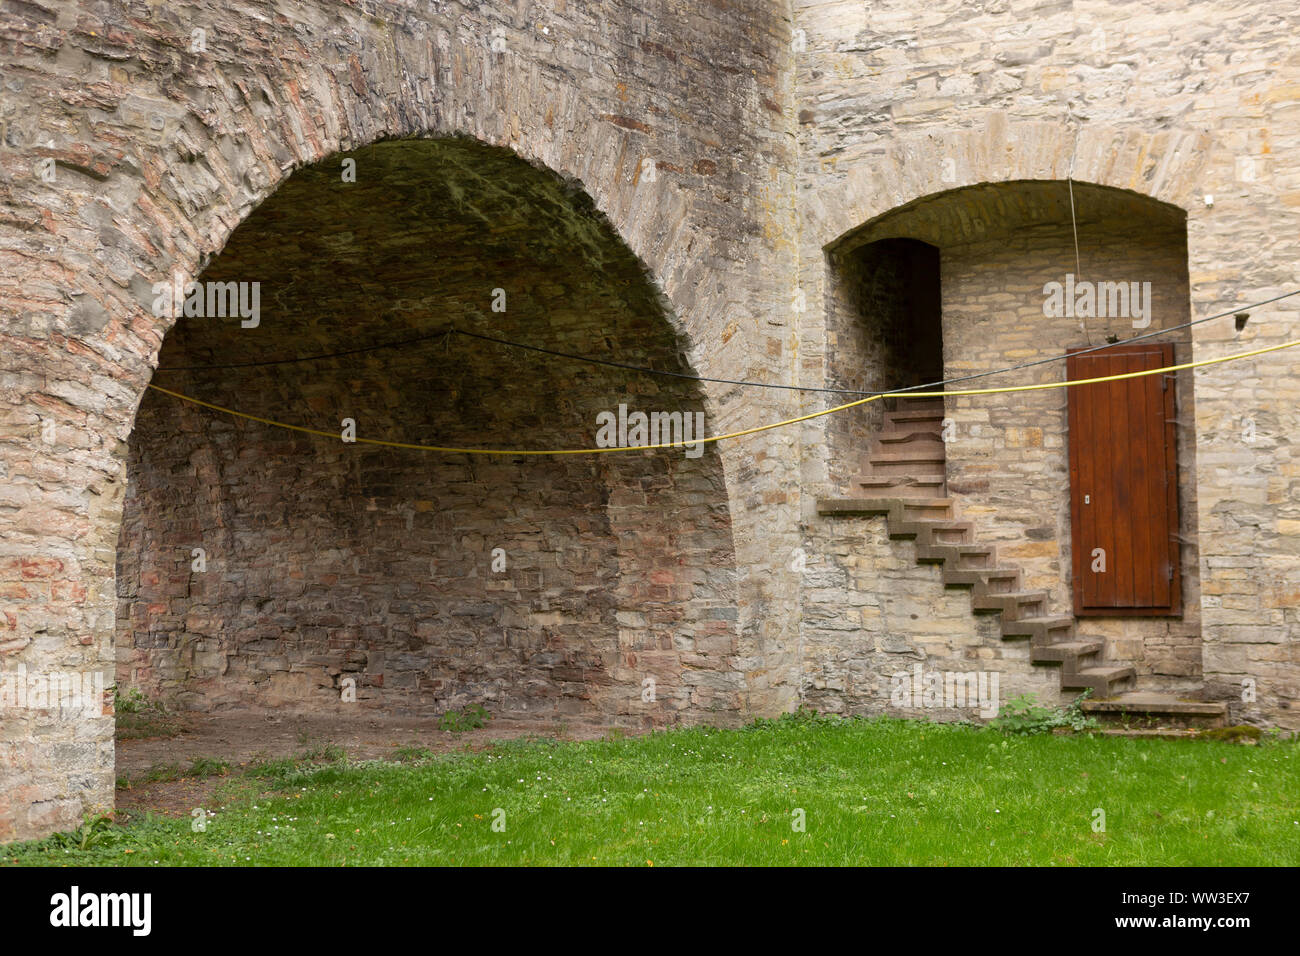 Architectural detail of the Wewelsburg castle with brick construction,  hidden staircase and door on the canal level Stock Photo